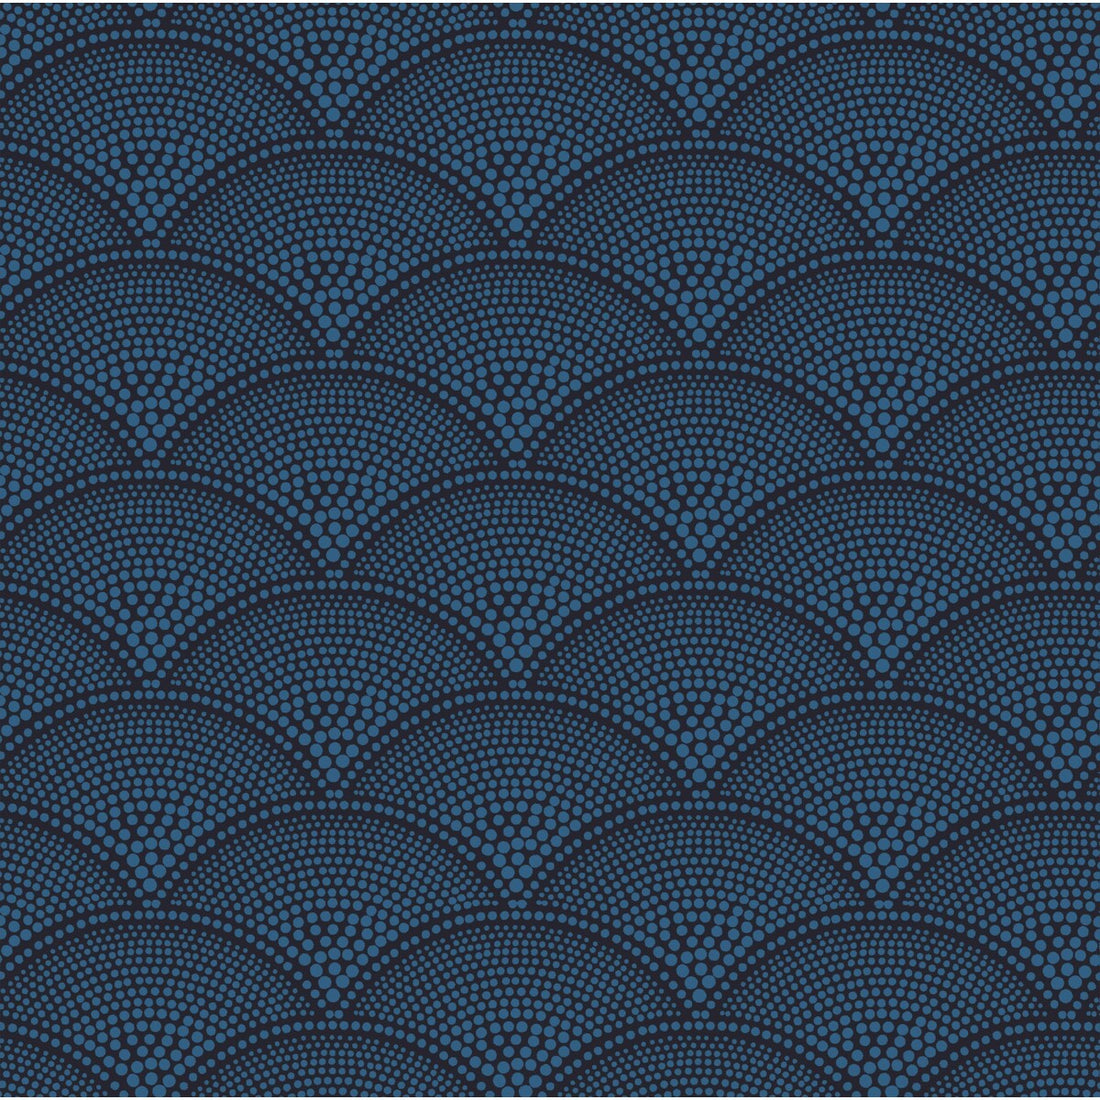 Feather Fan fabric in hyac on char color - pattern F111/8028.CS.0 - by Cole &amp; Son in the Cole &amp; Son Contemporary Fabrics collection